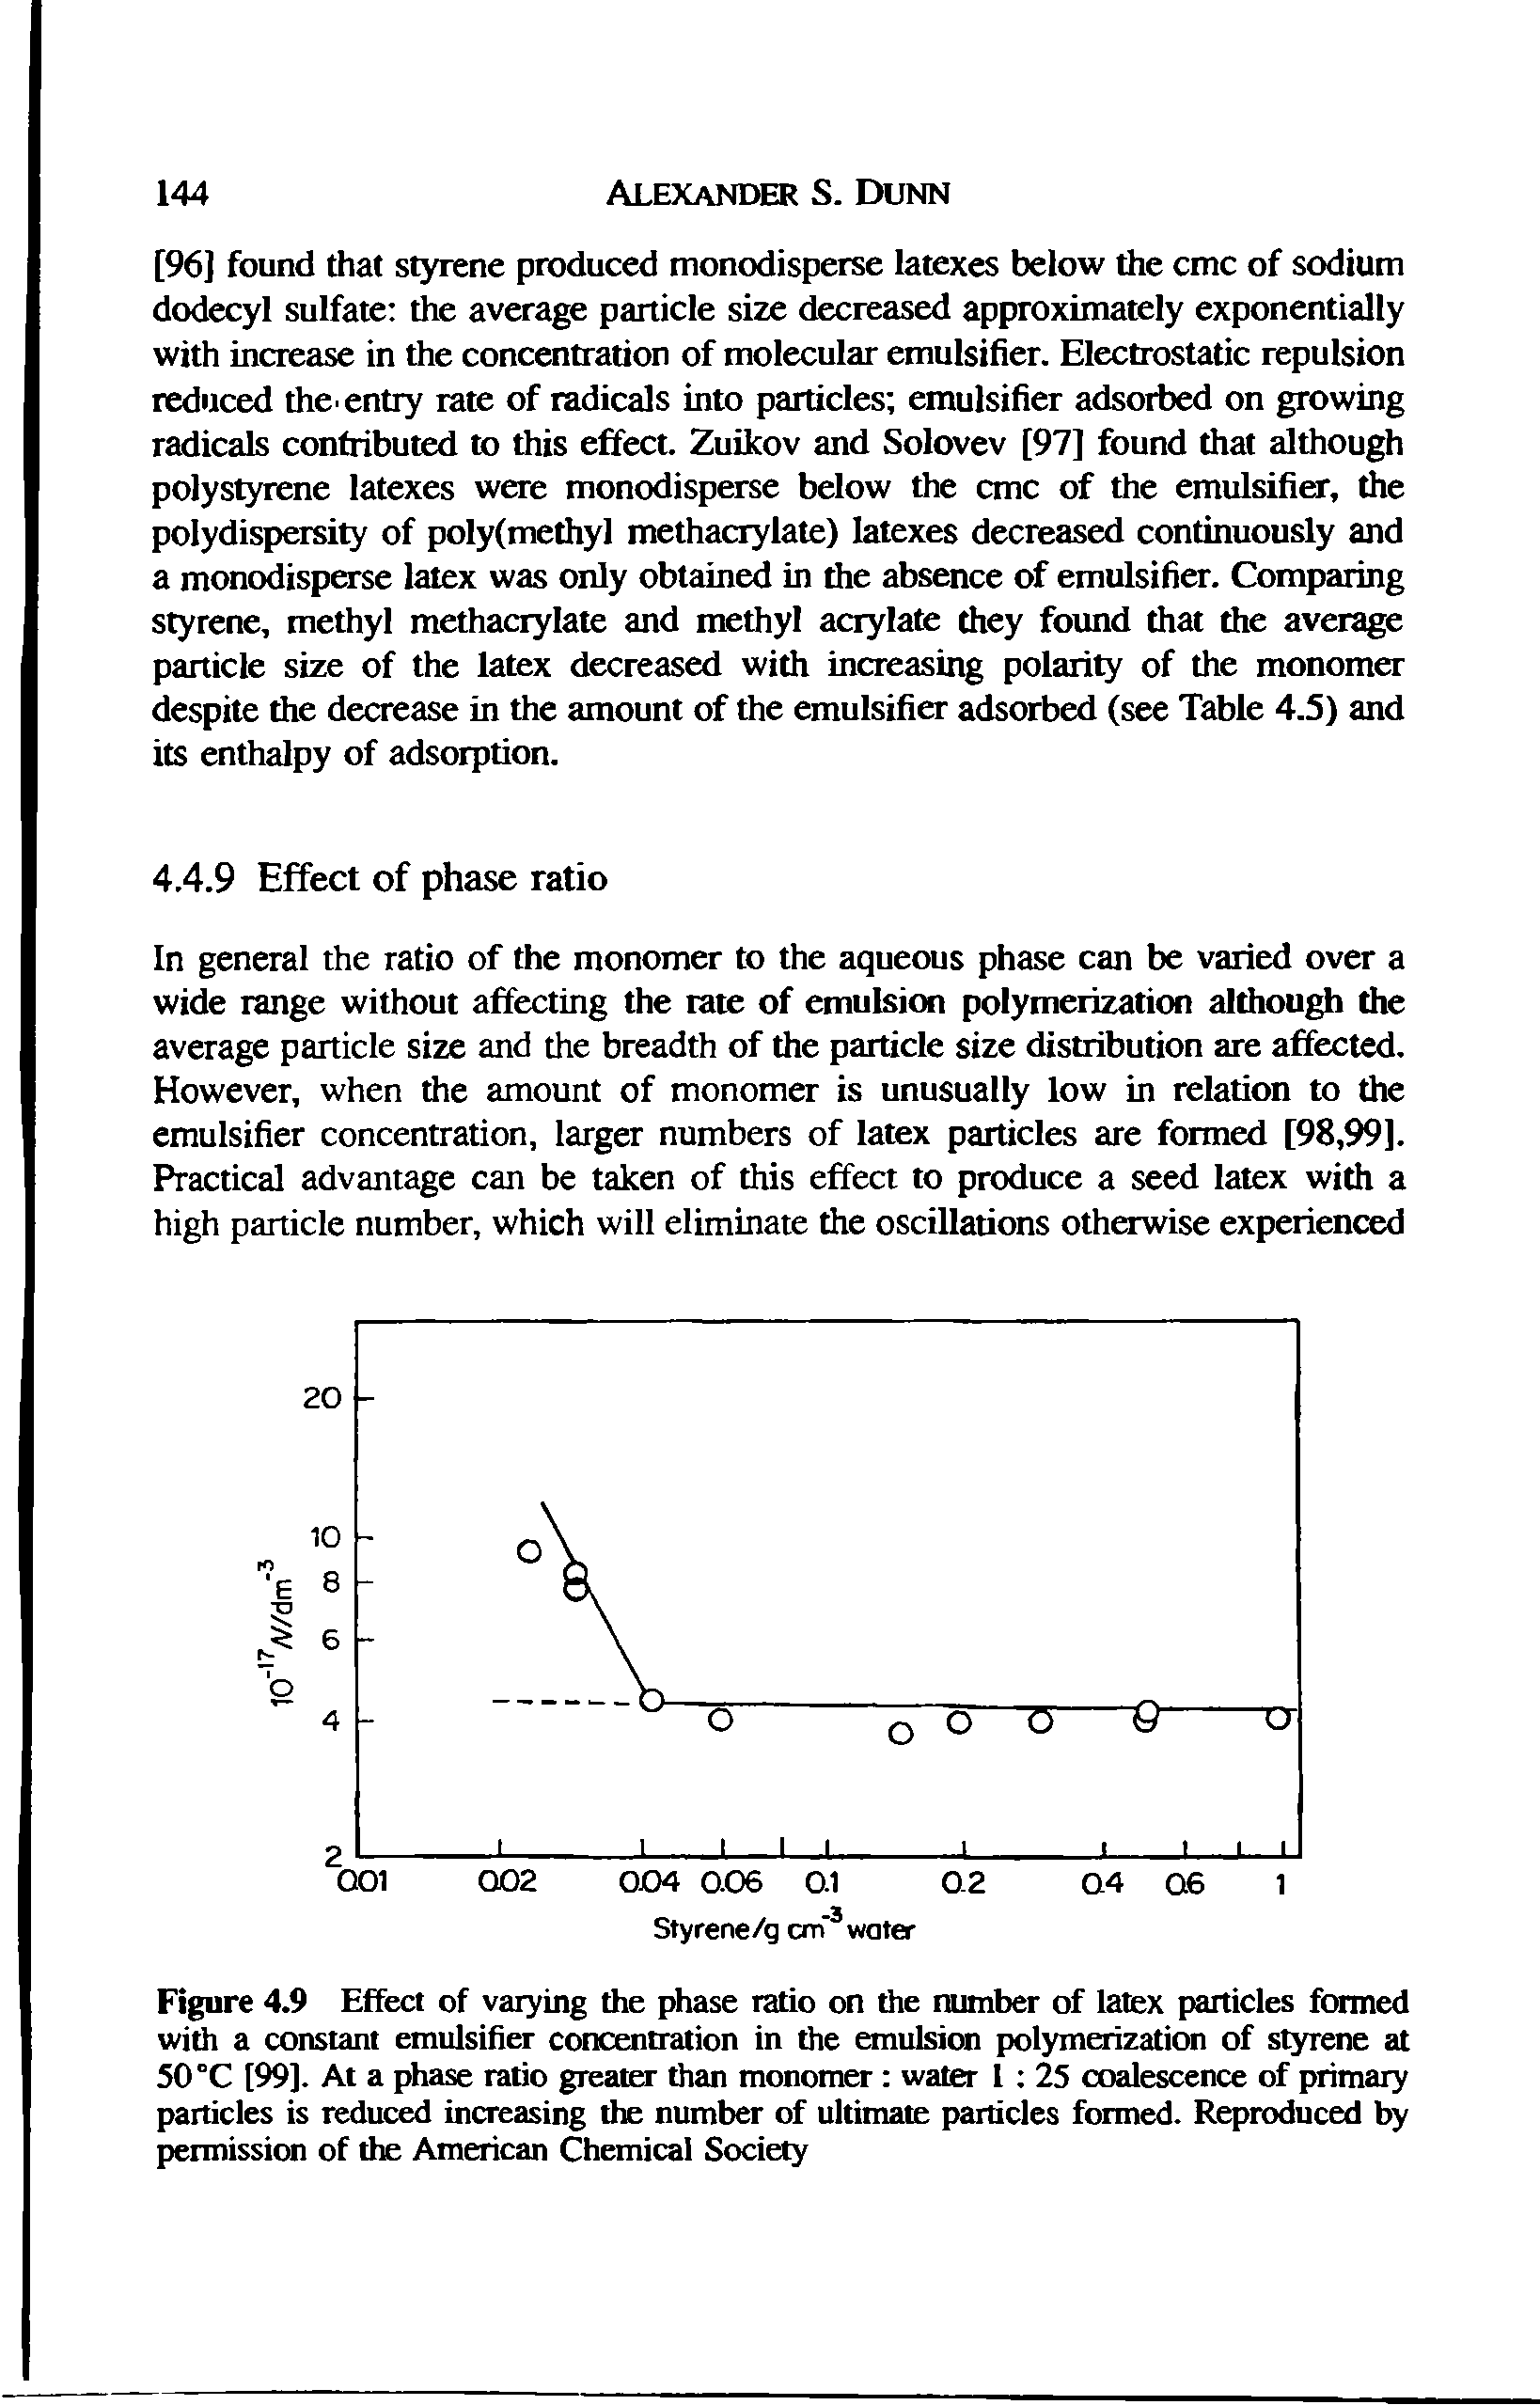 Figure 4.9 Effect of varying the phase ratio on the tuimber of latex particles formed with a constant emulsifier concentration in the emulsion polymerization of styrene at 50 °C [99]. At a phase ratio greater than monomer water 1 25 coalescence of primary particles is reduced increasing the number of ultimate particles formed. Reproduced by permission of the American Chemical Society...